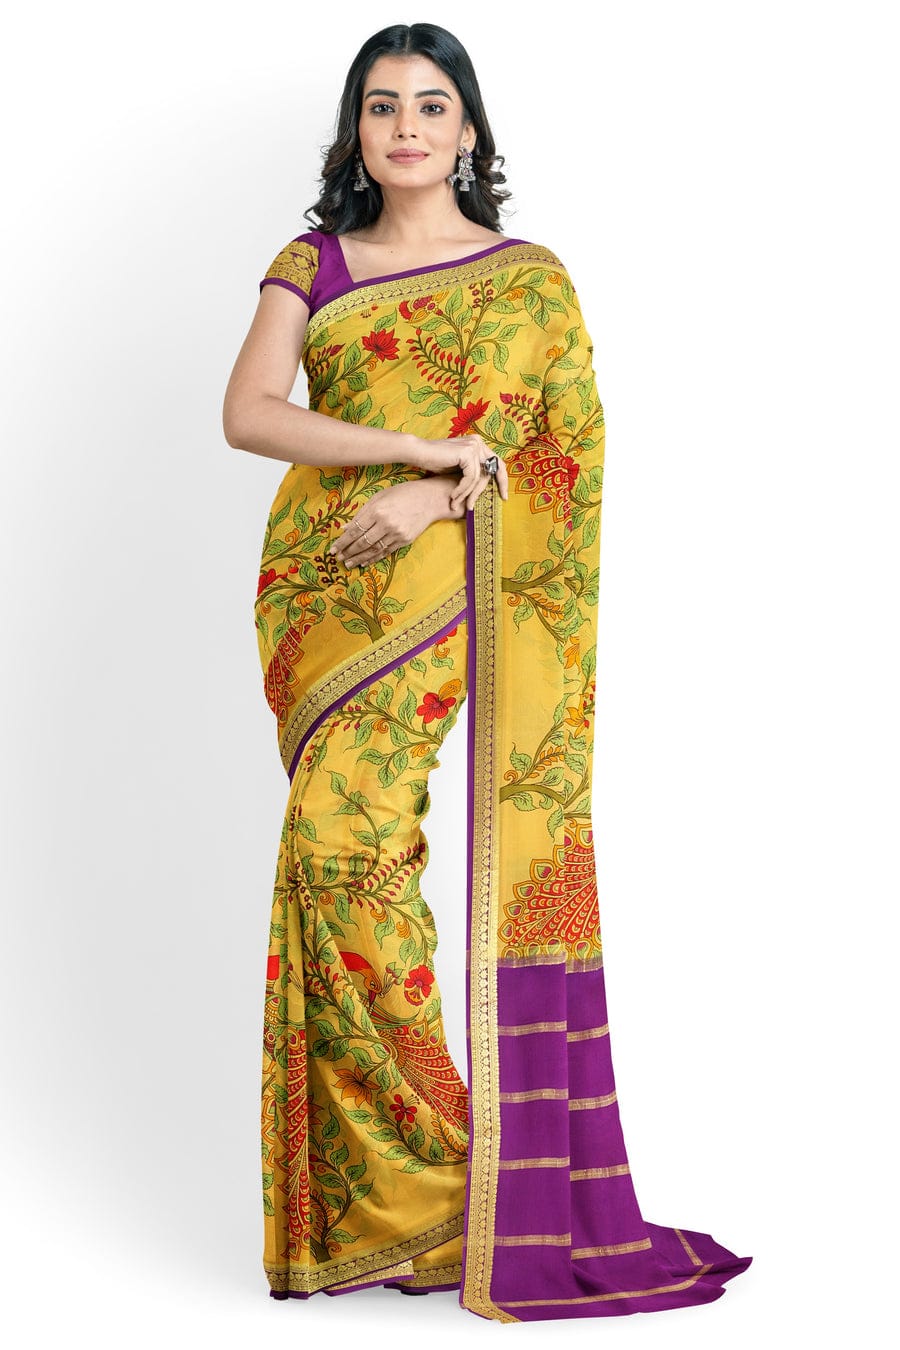 Trendy Tips for Styling Mysore Silk Sarees